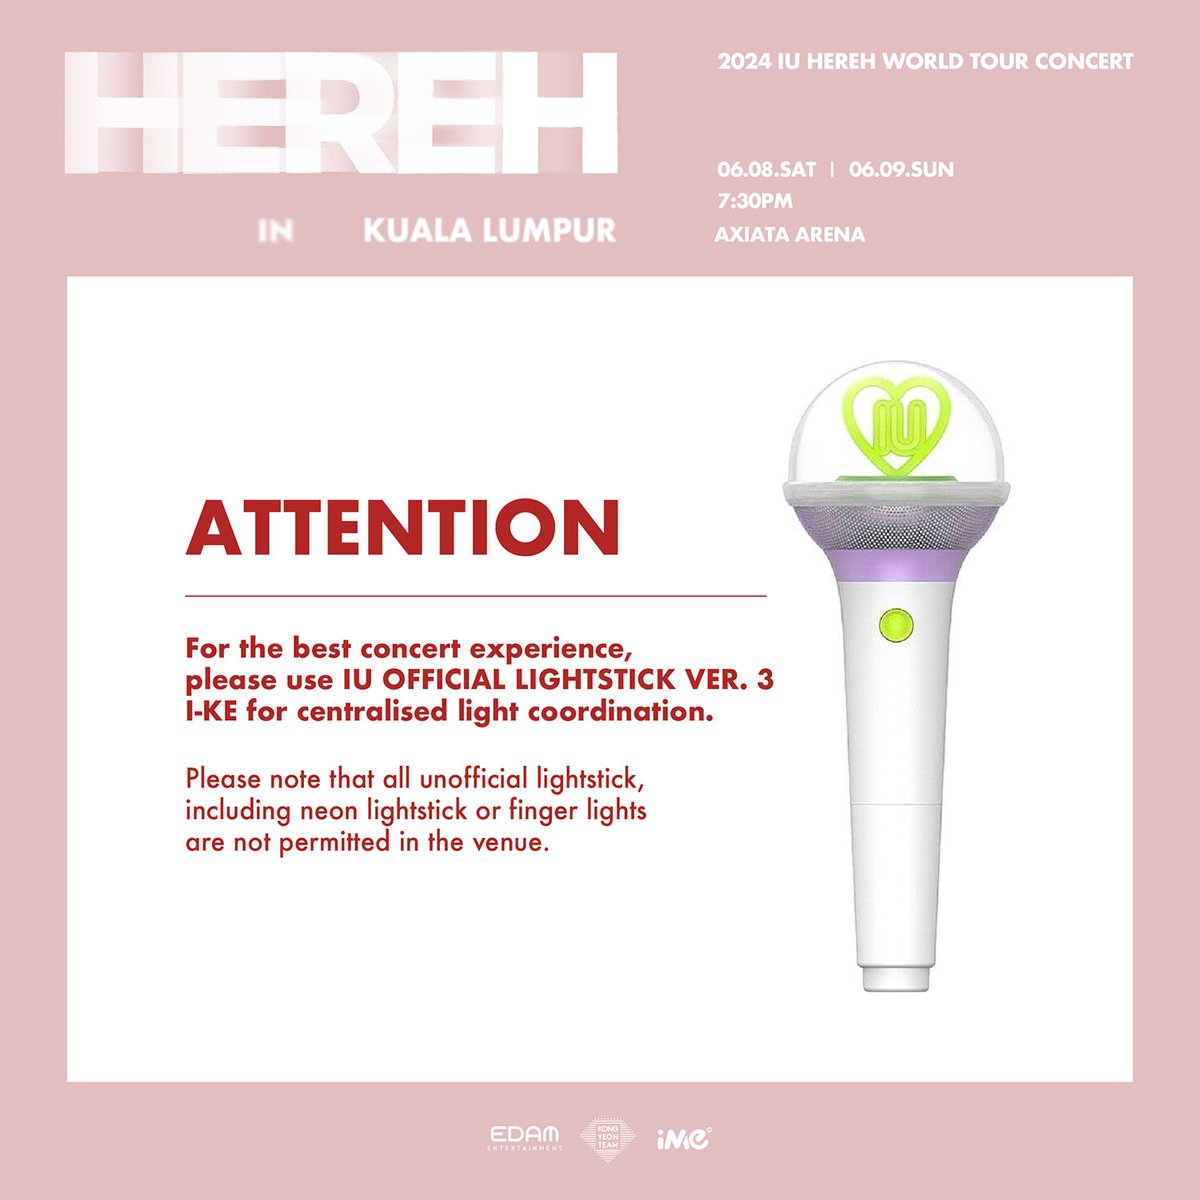 2024 IU HEREH WORLD TOUR CONCERT IN KUALA LUMPUR-OFFICIAL LIGHTSTICK PAIRING GUIDE

Dear UAENA, to enhance your concert experience, we've prepared an OFFICIAL LIGHTSTICK PAIRING GUIDE for your seamless connecting during the show.

SEE YOU SOON!

#IU #HEREH #HEREH_WORLD_TOUR_IN_KL